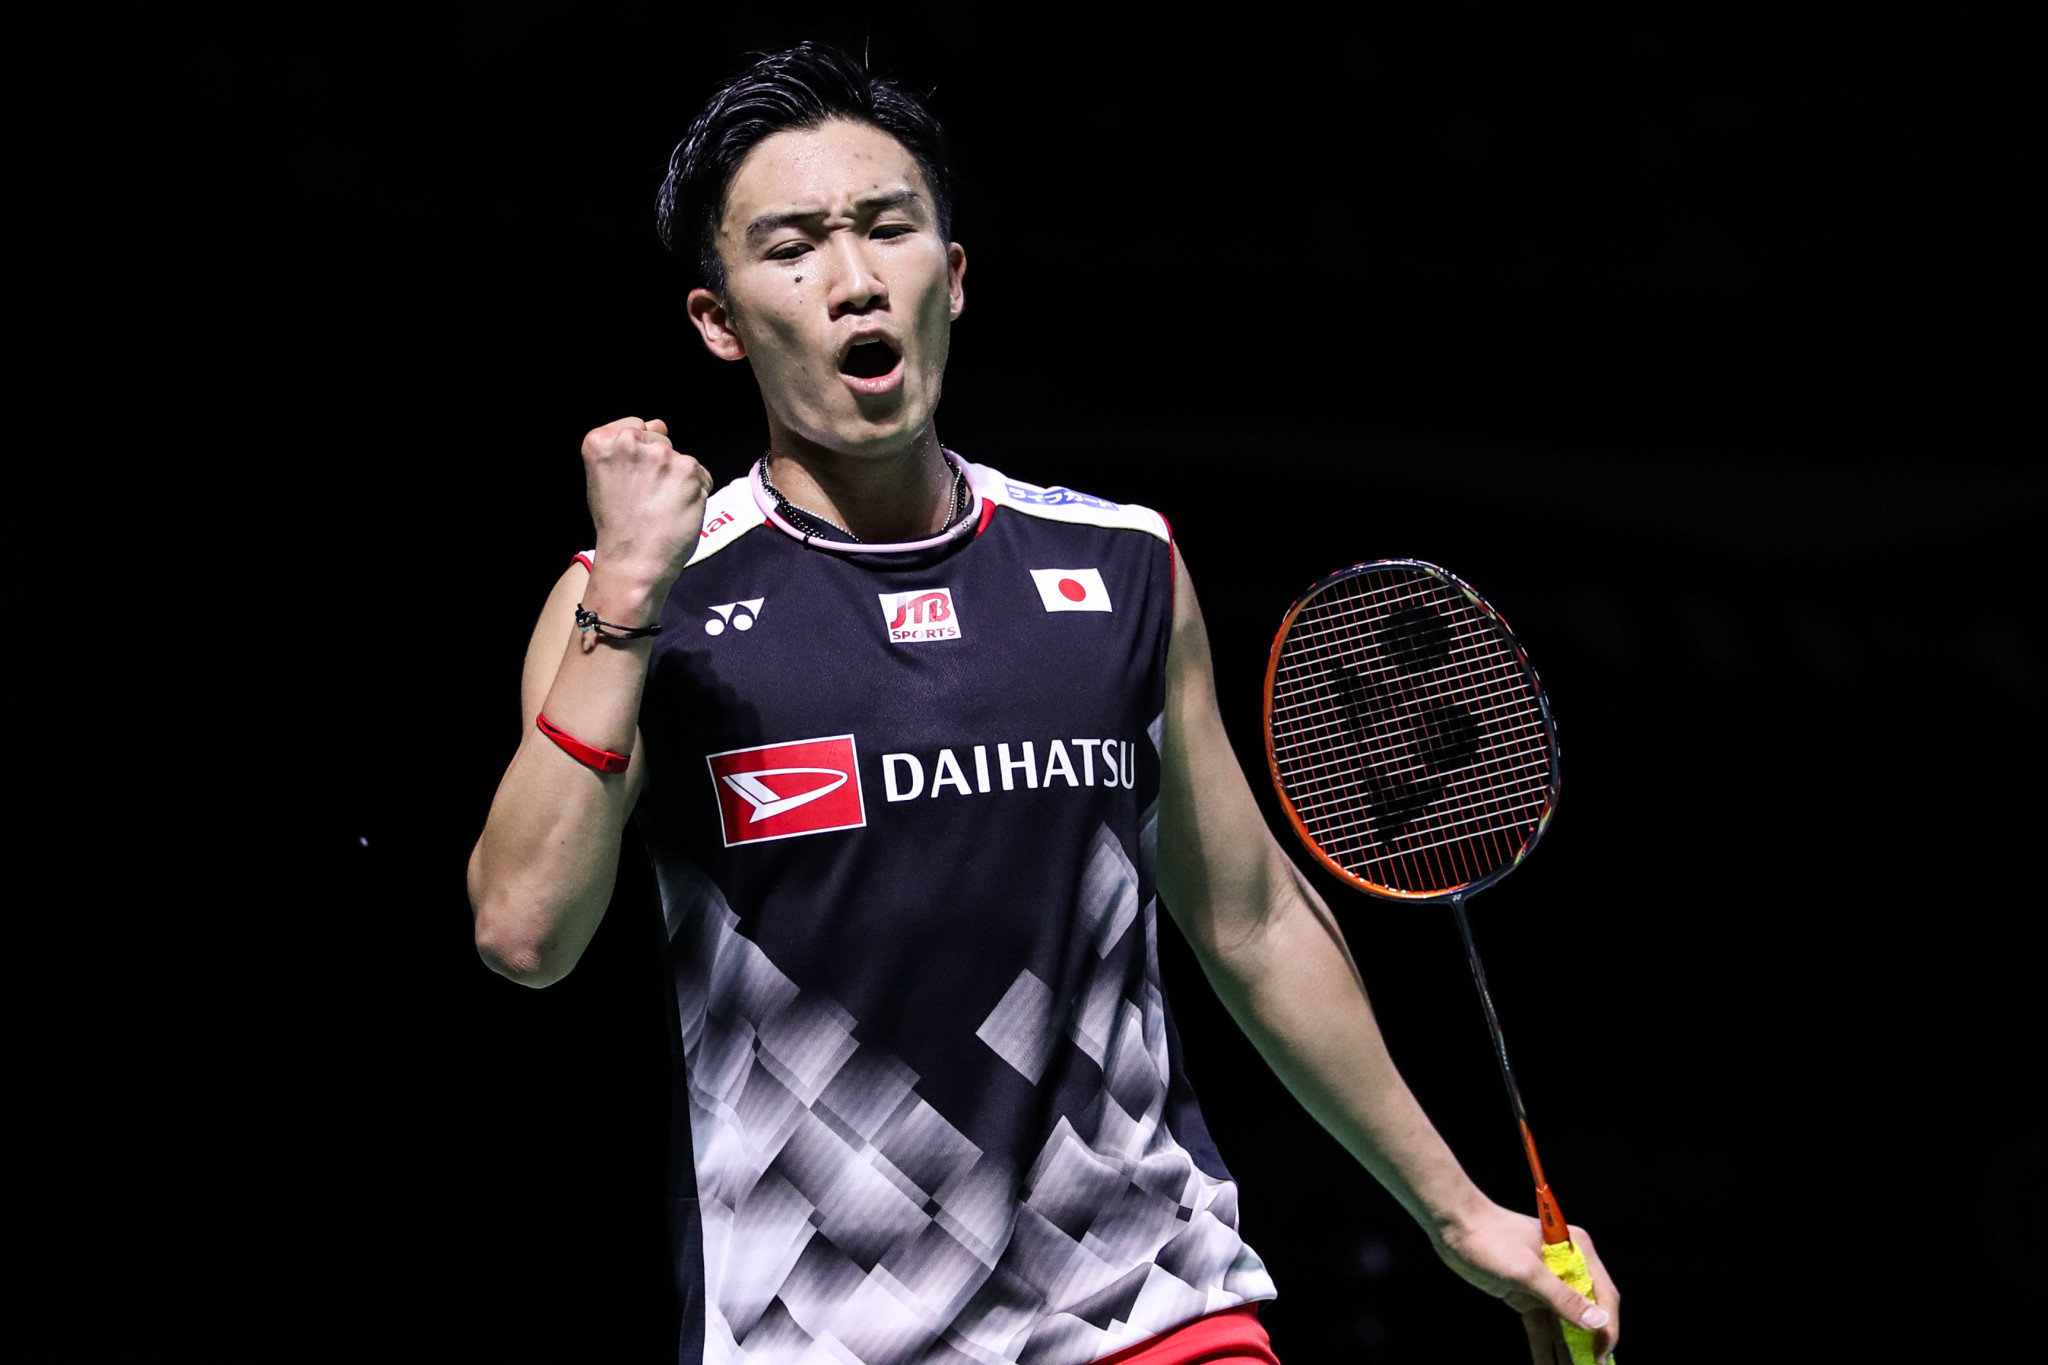 Kento Momota will be looking to claim an 11th title of the season at the BWF Hong Kong Open ©Getty Images